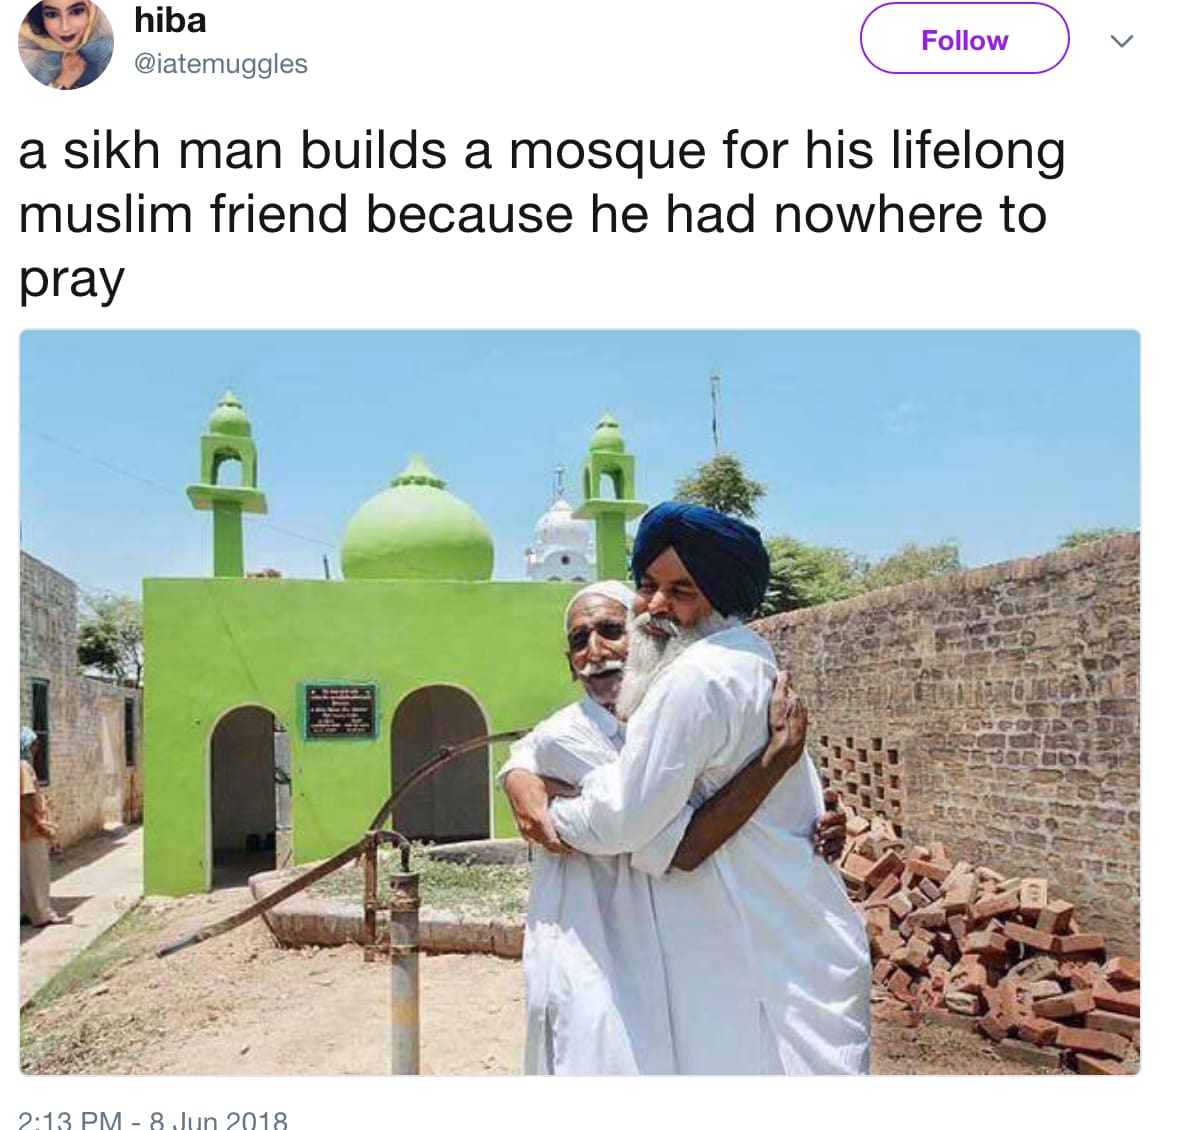 Sikh man builds his friend a mosque